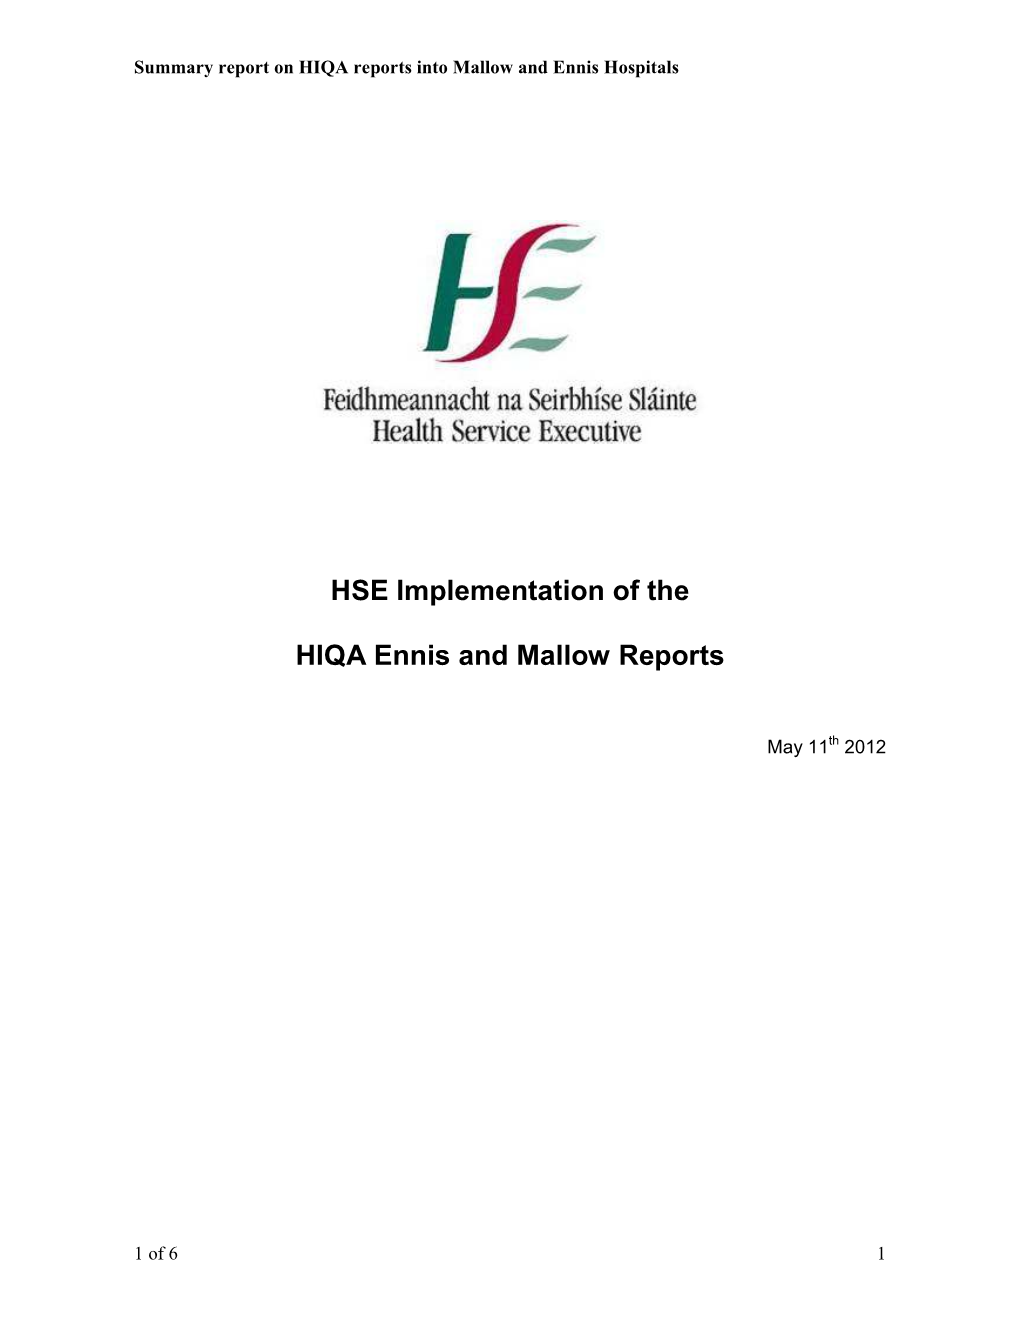 HSE Implementation of the HIQA Ennis and Mallow Reports